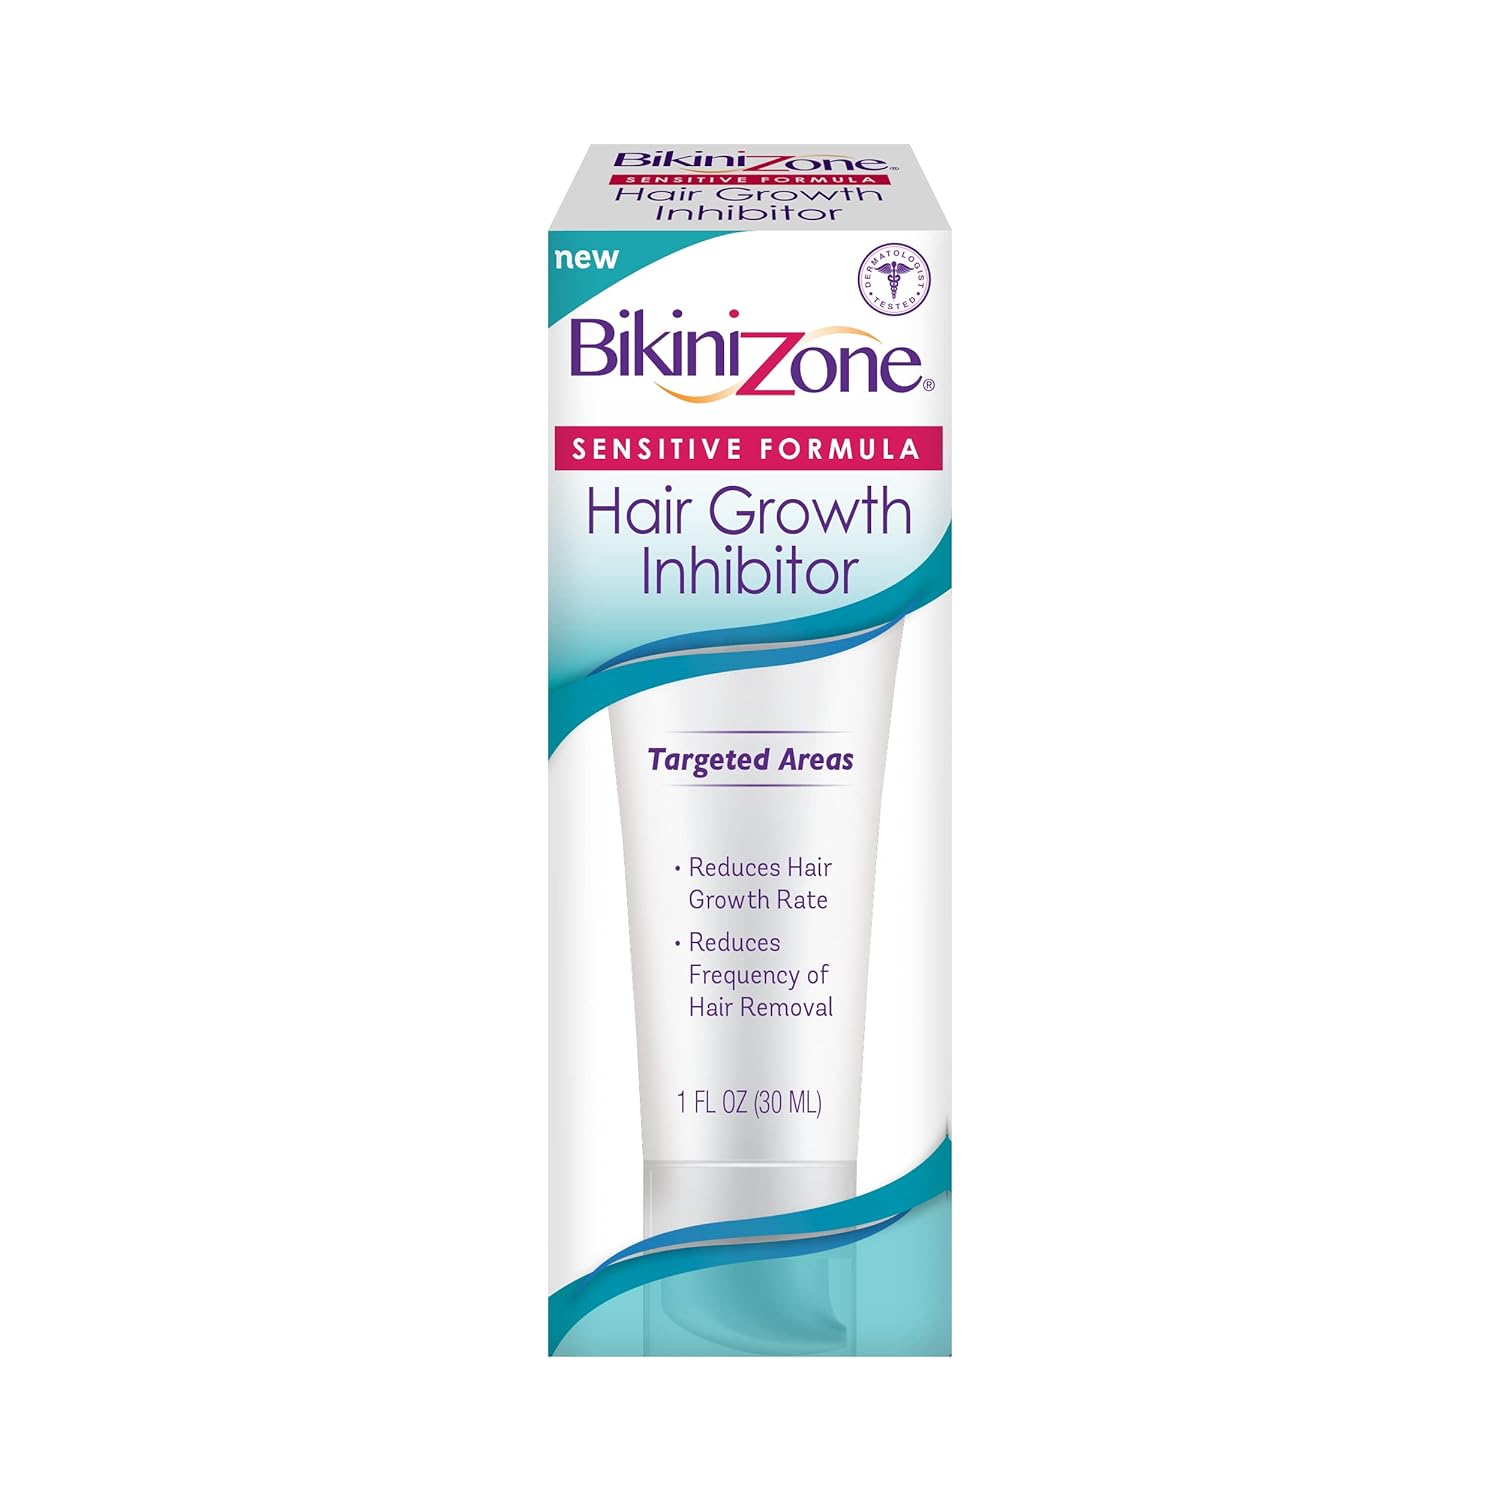 Bikini Zone Hair Growth Inhibitor - Cream to Help Stop Hair Growth for Face, Legs, Lips & Chin - Reduces Hair Density & Length - Painless Hair Inhibitor & Moisturizer After Waxing & Shaving (1 oz)